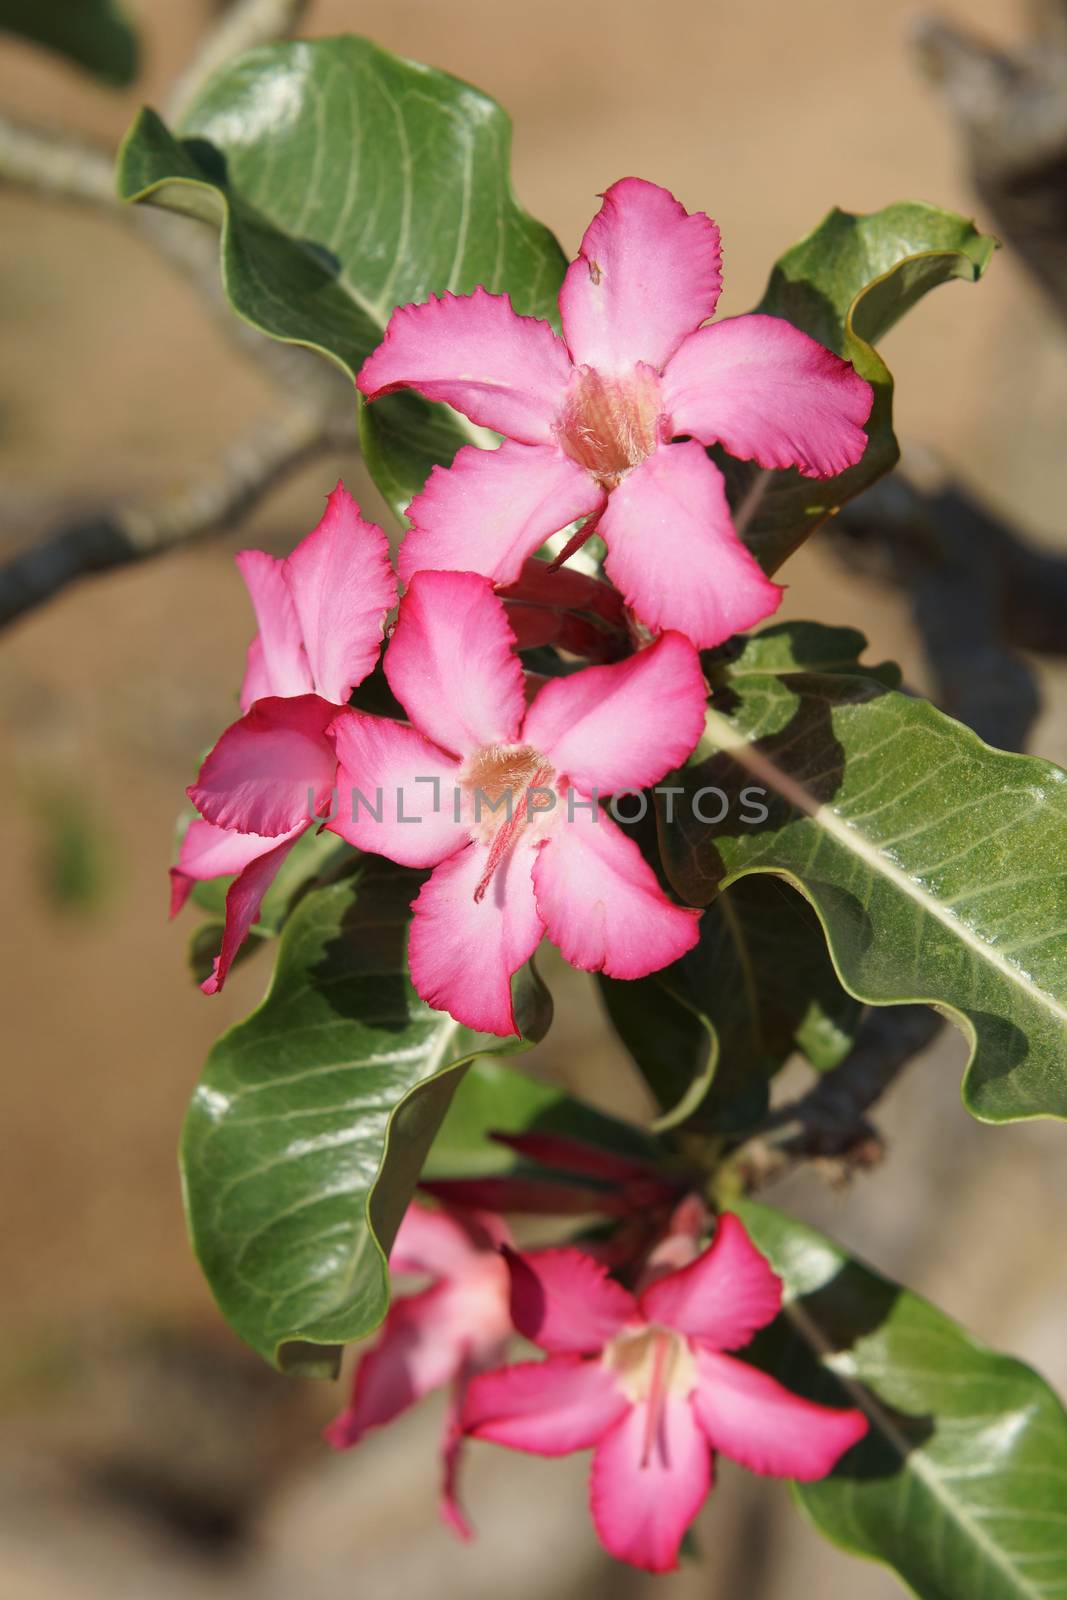 Desert-rose in the south of Ethiopia, Africa